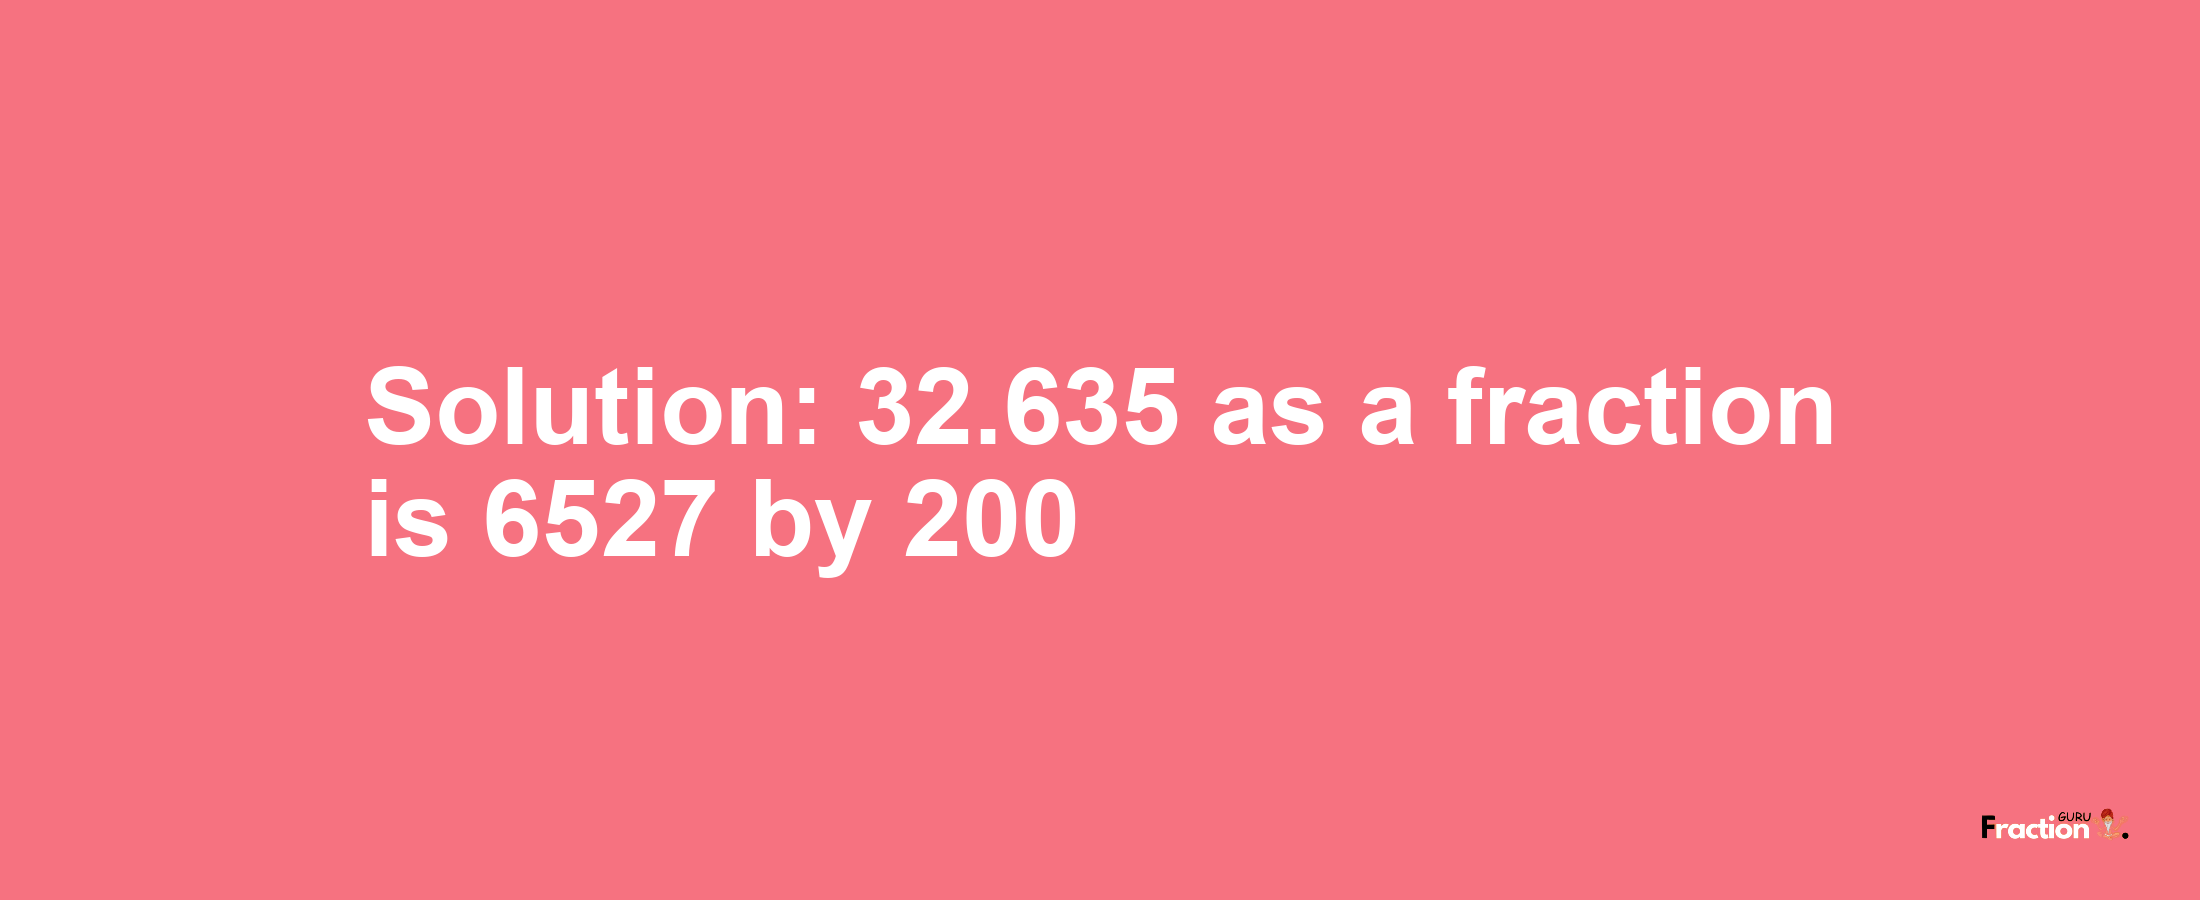 Solution:32.635 as a fraction is 6527/200